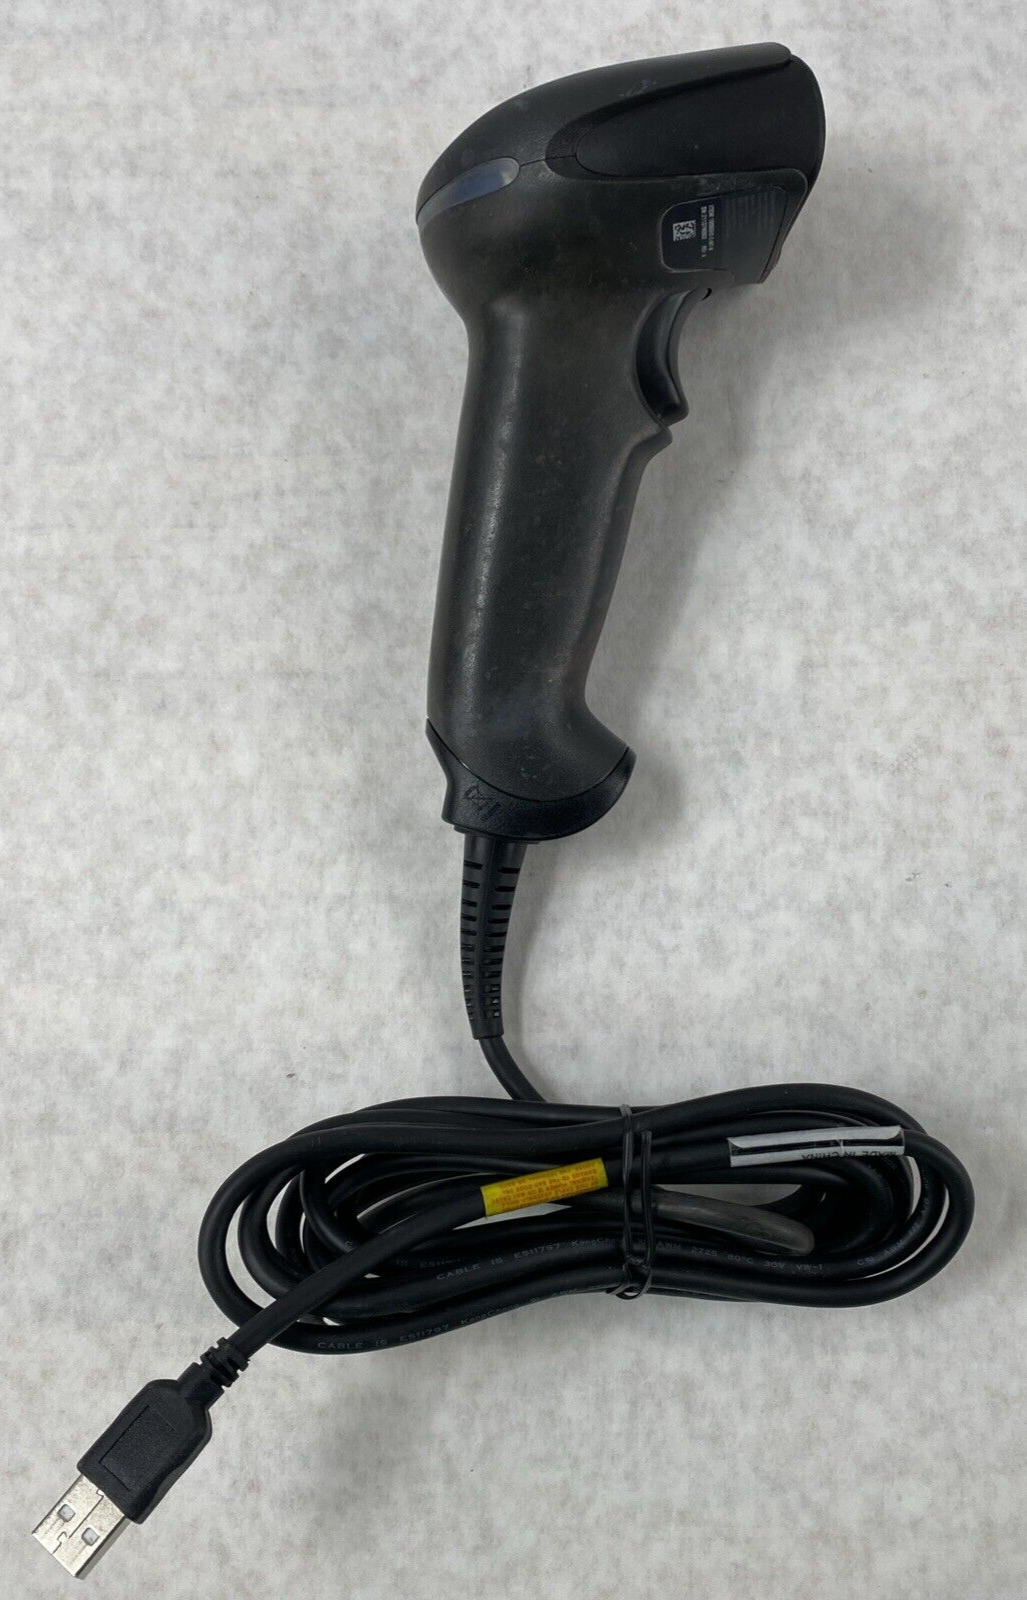 Honeywell 1950 1950GHD-2-INT-N Handheld USB Barcode Scanner + USB Cable